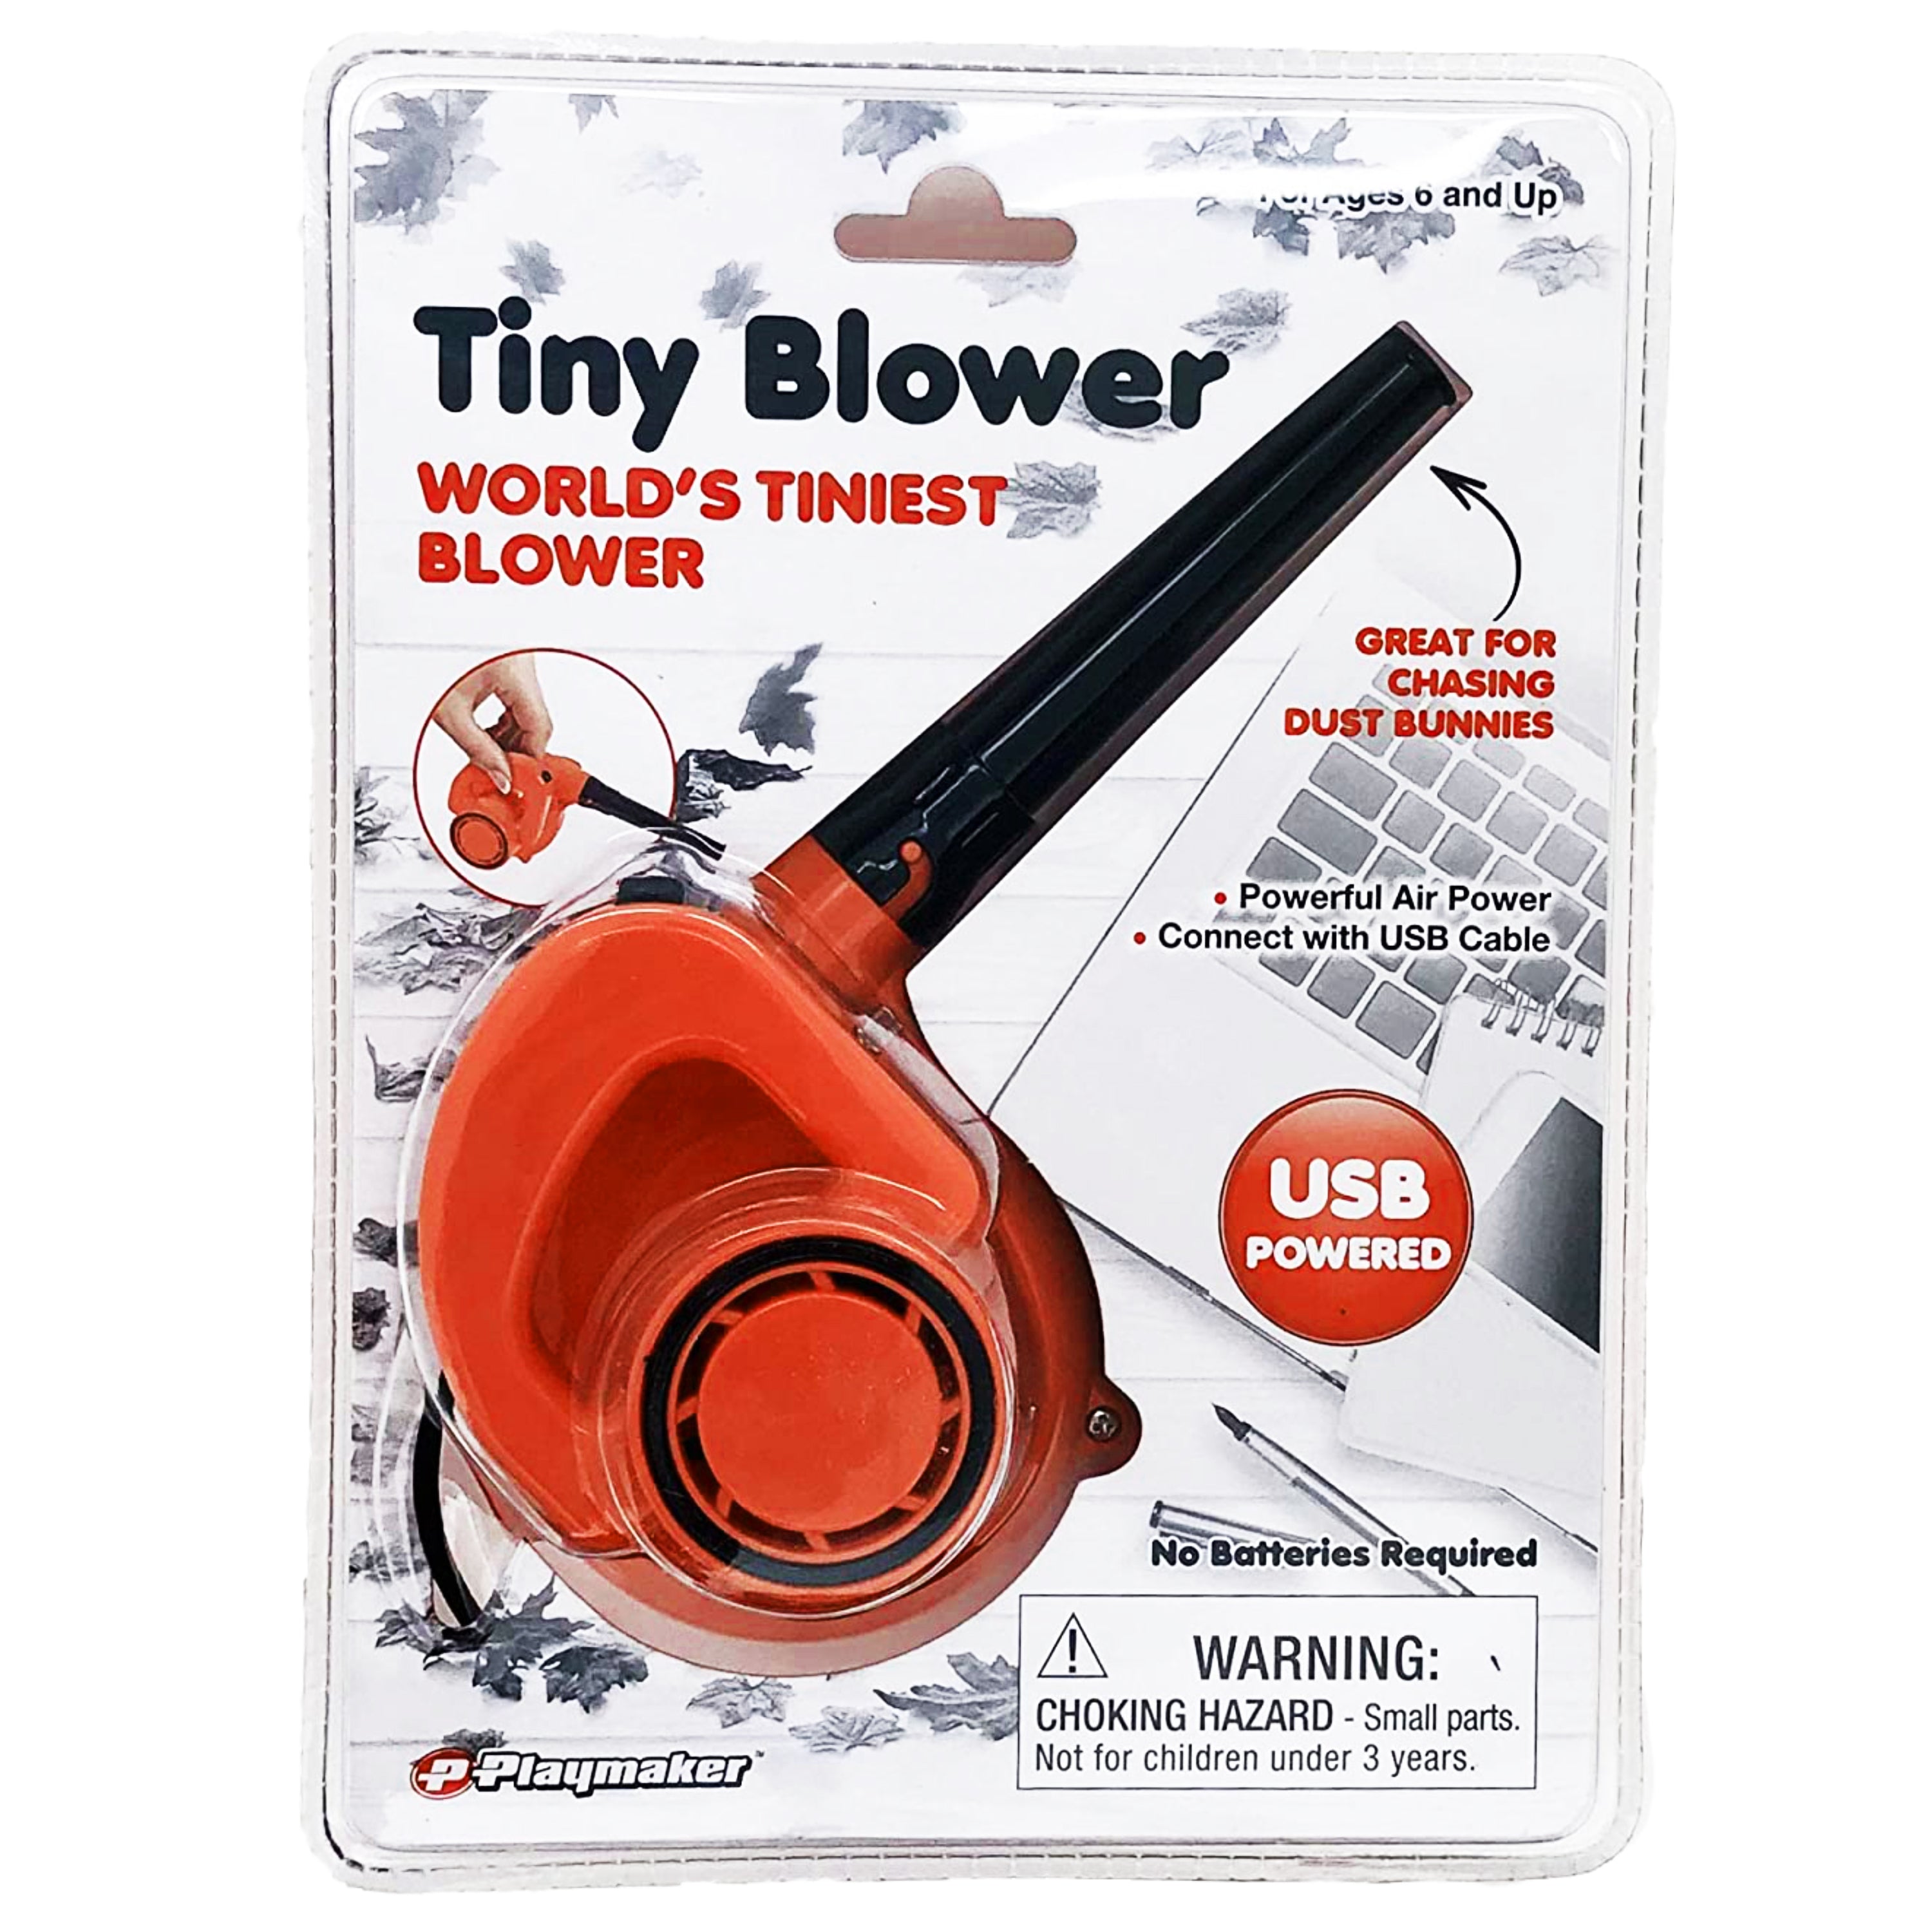 World smallest blower (by Westminster) Dual Power - Battery and USB